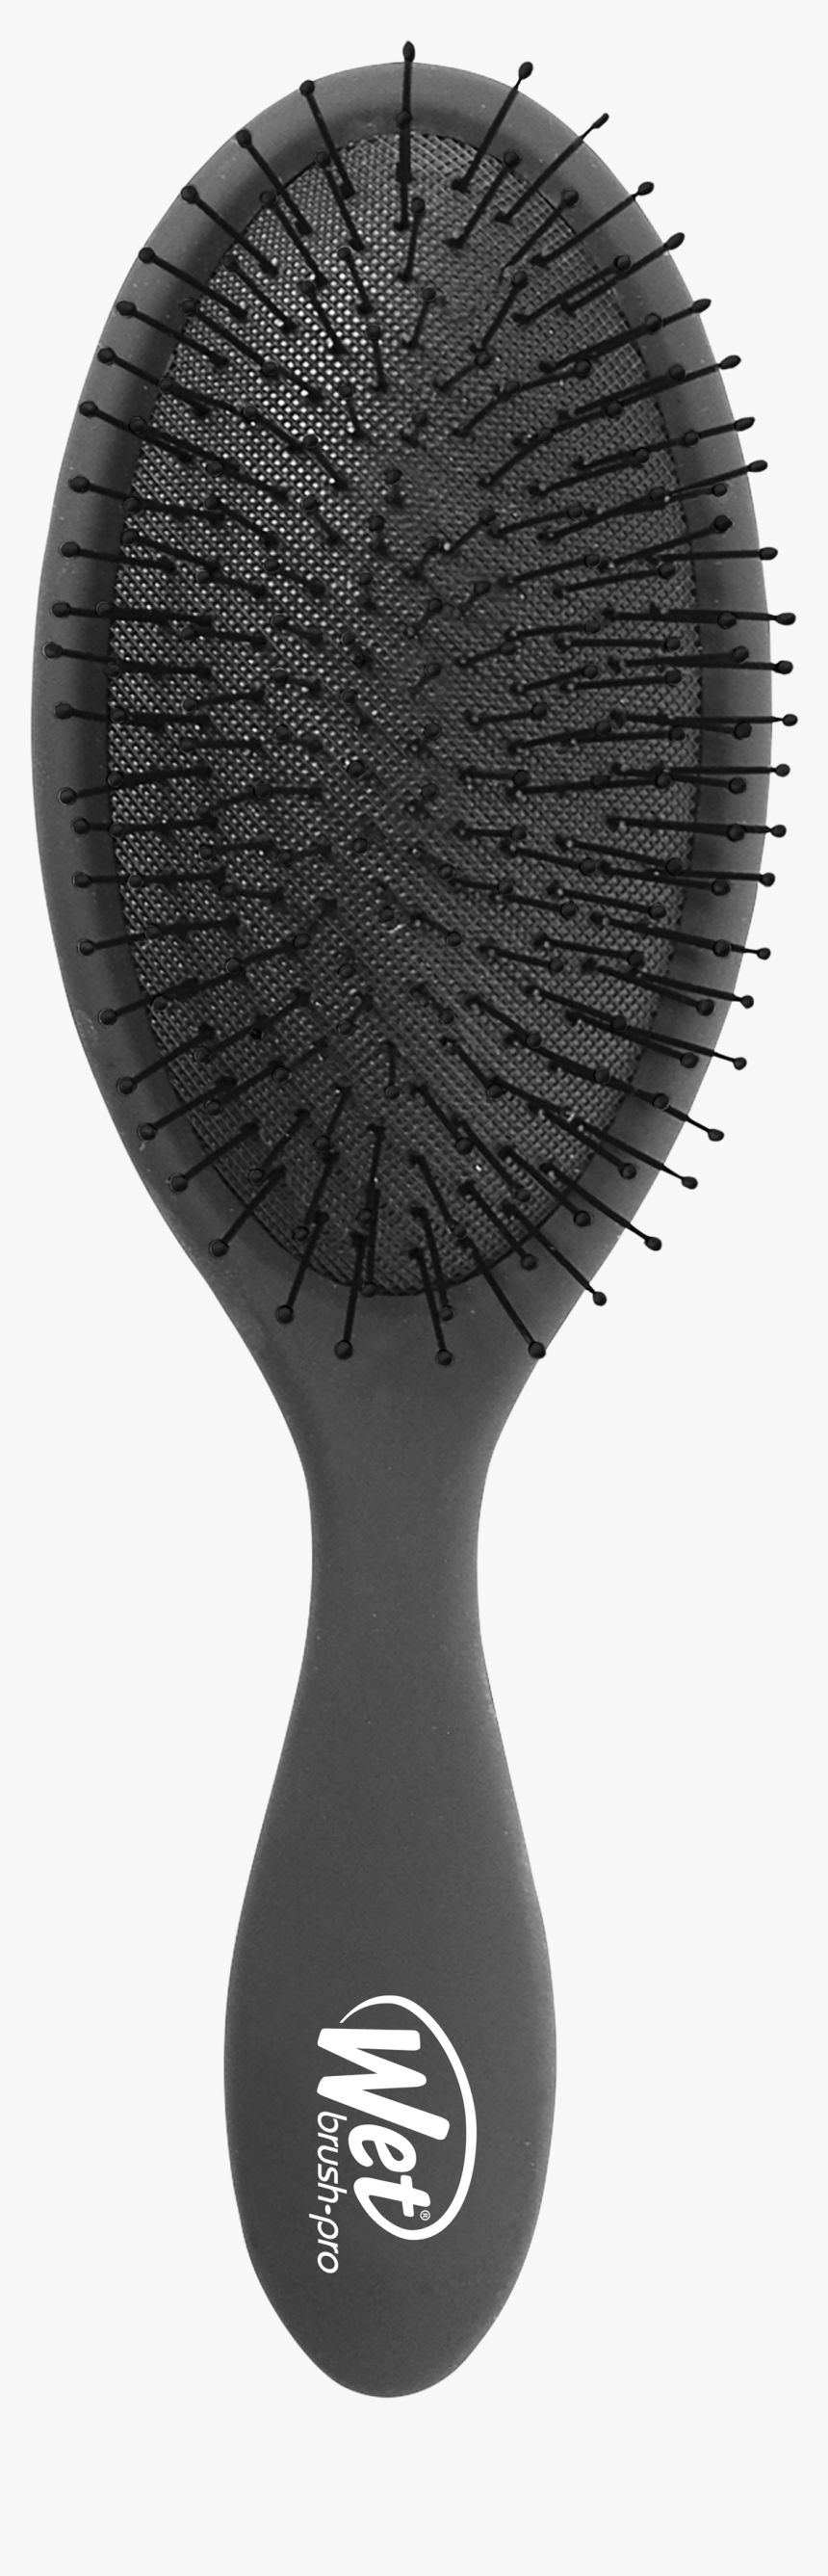 Hairbrush Png - Wet And Dry Hair Brushes